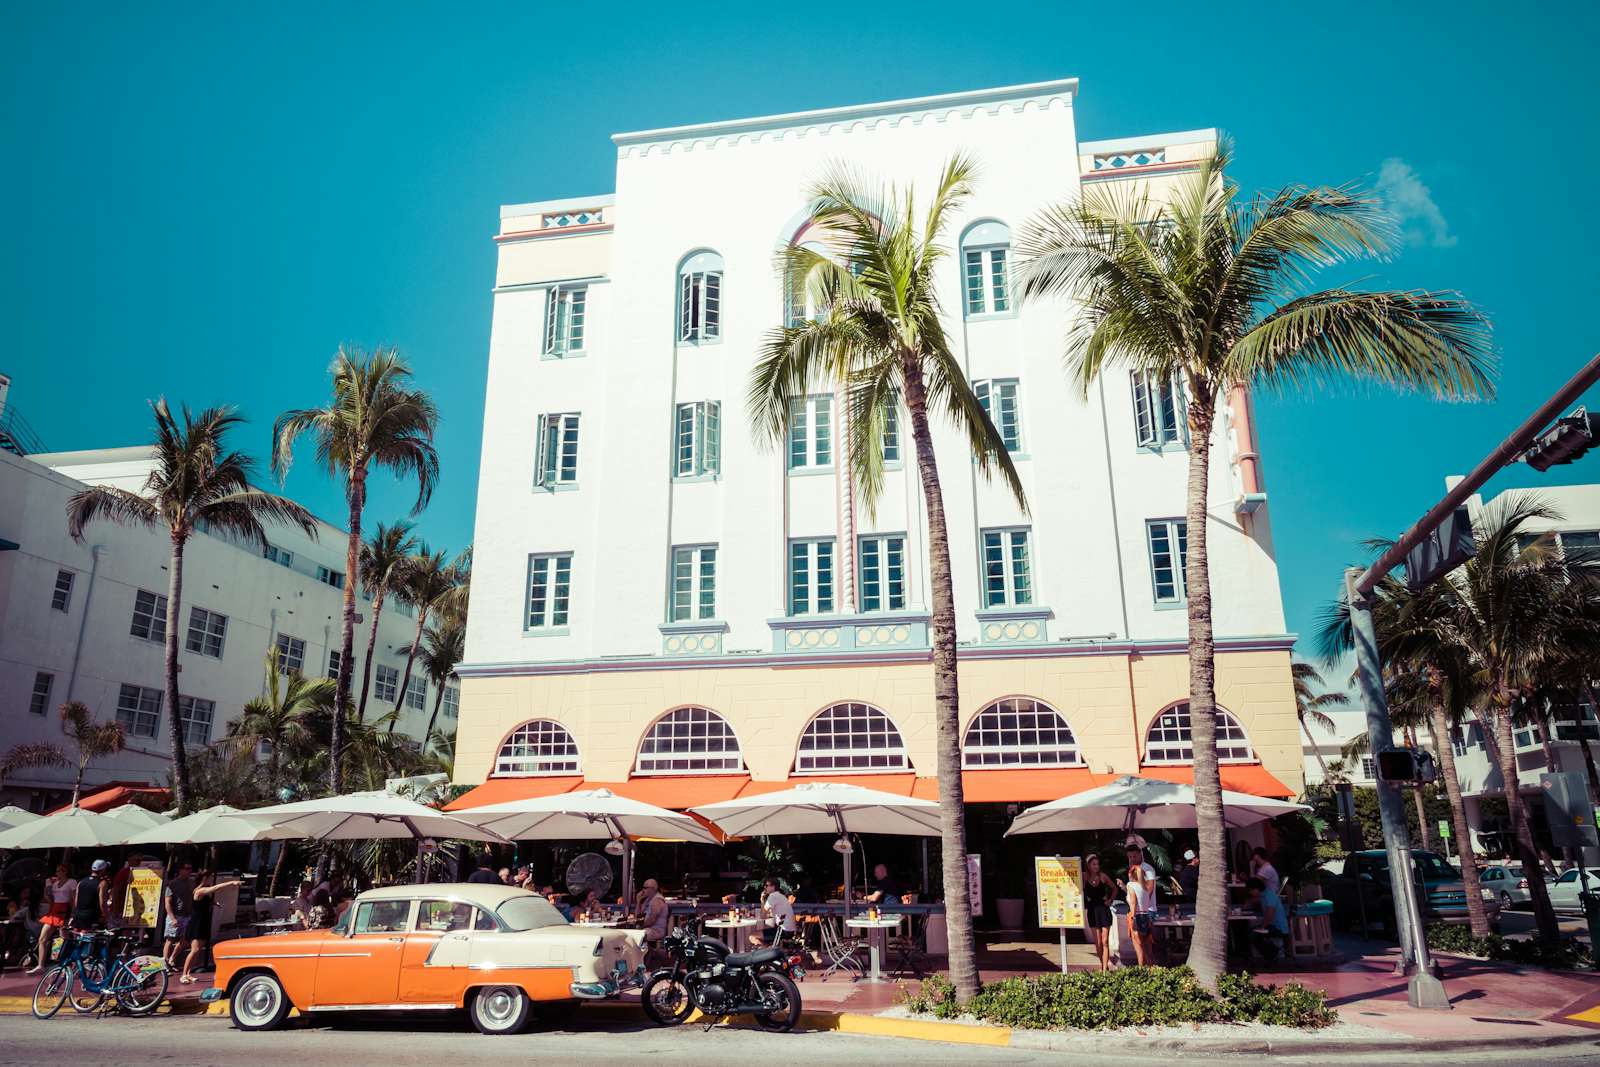 Vintage car parked along Ocean Drive in the famous Art Deco district in South Beach, Florida